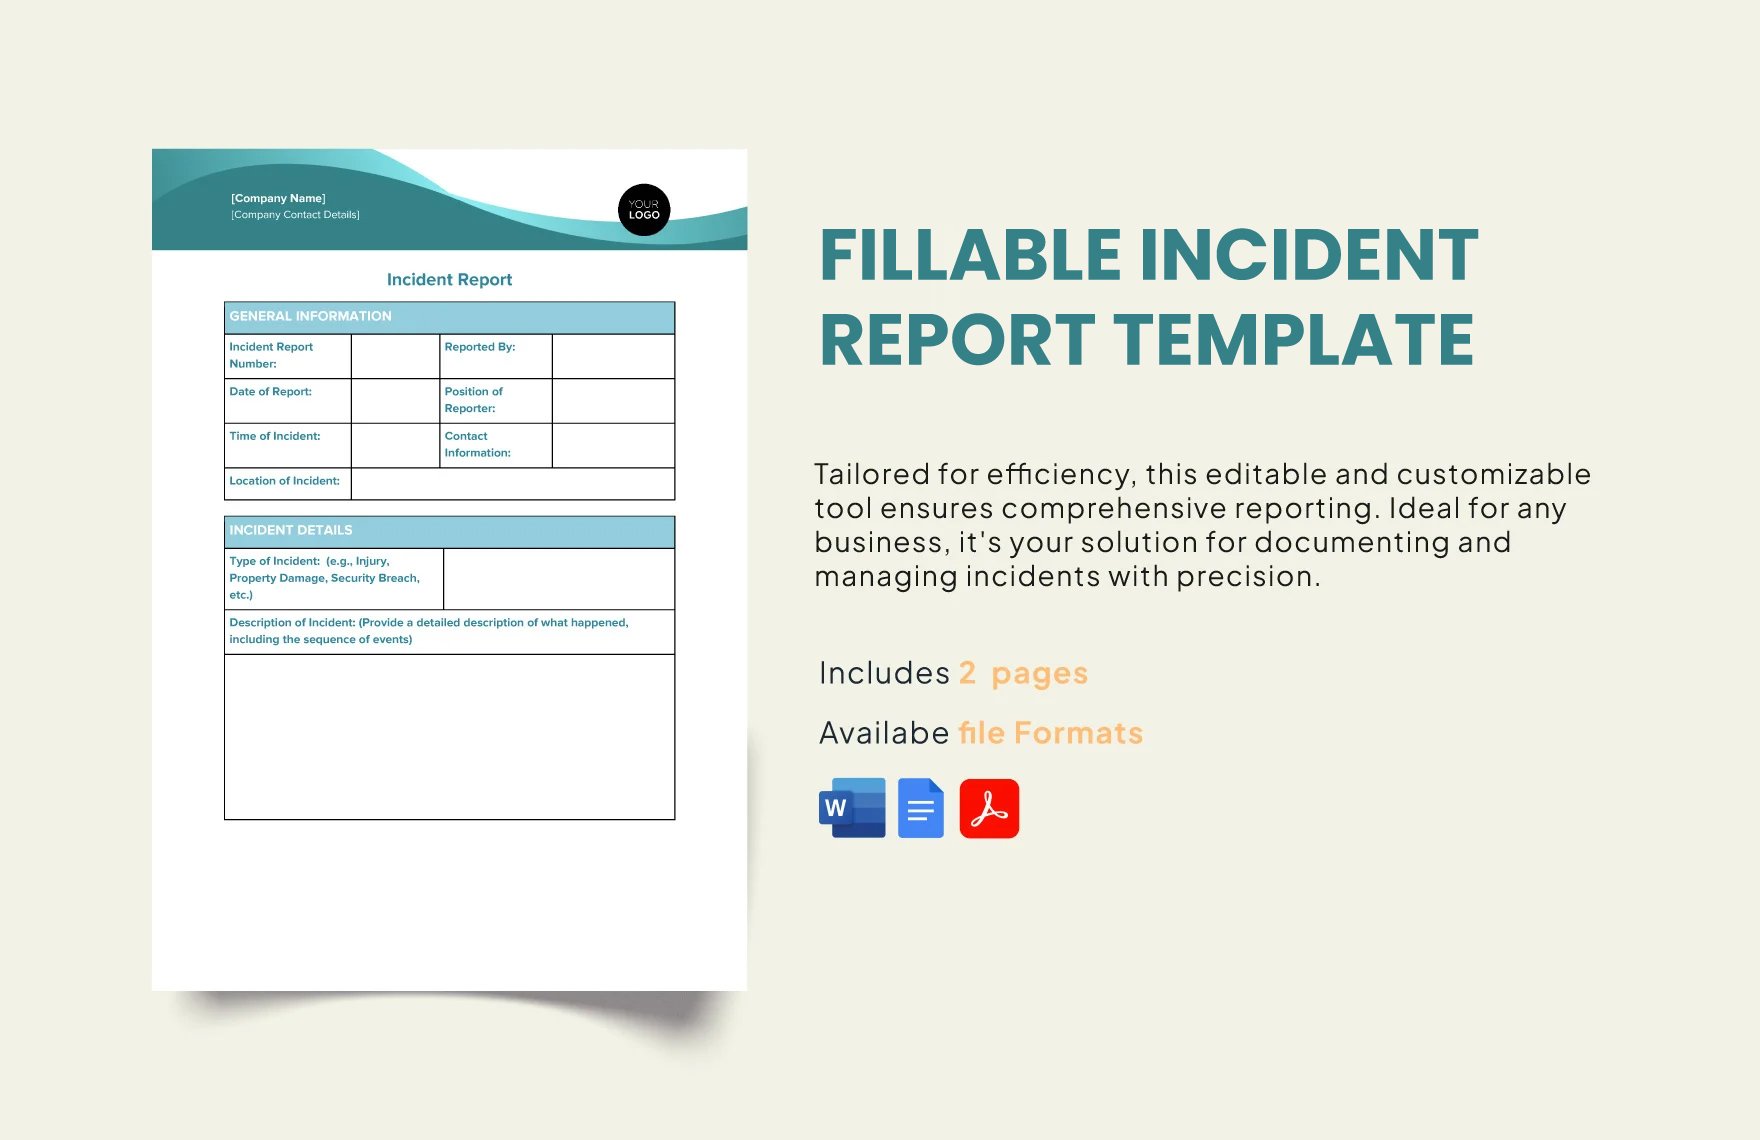 Free Fillable Incident Report Template in Word, Google Docs, PDF